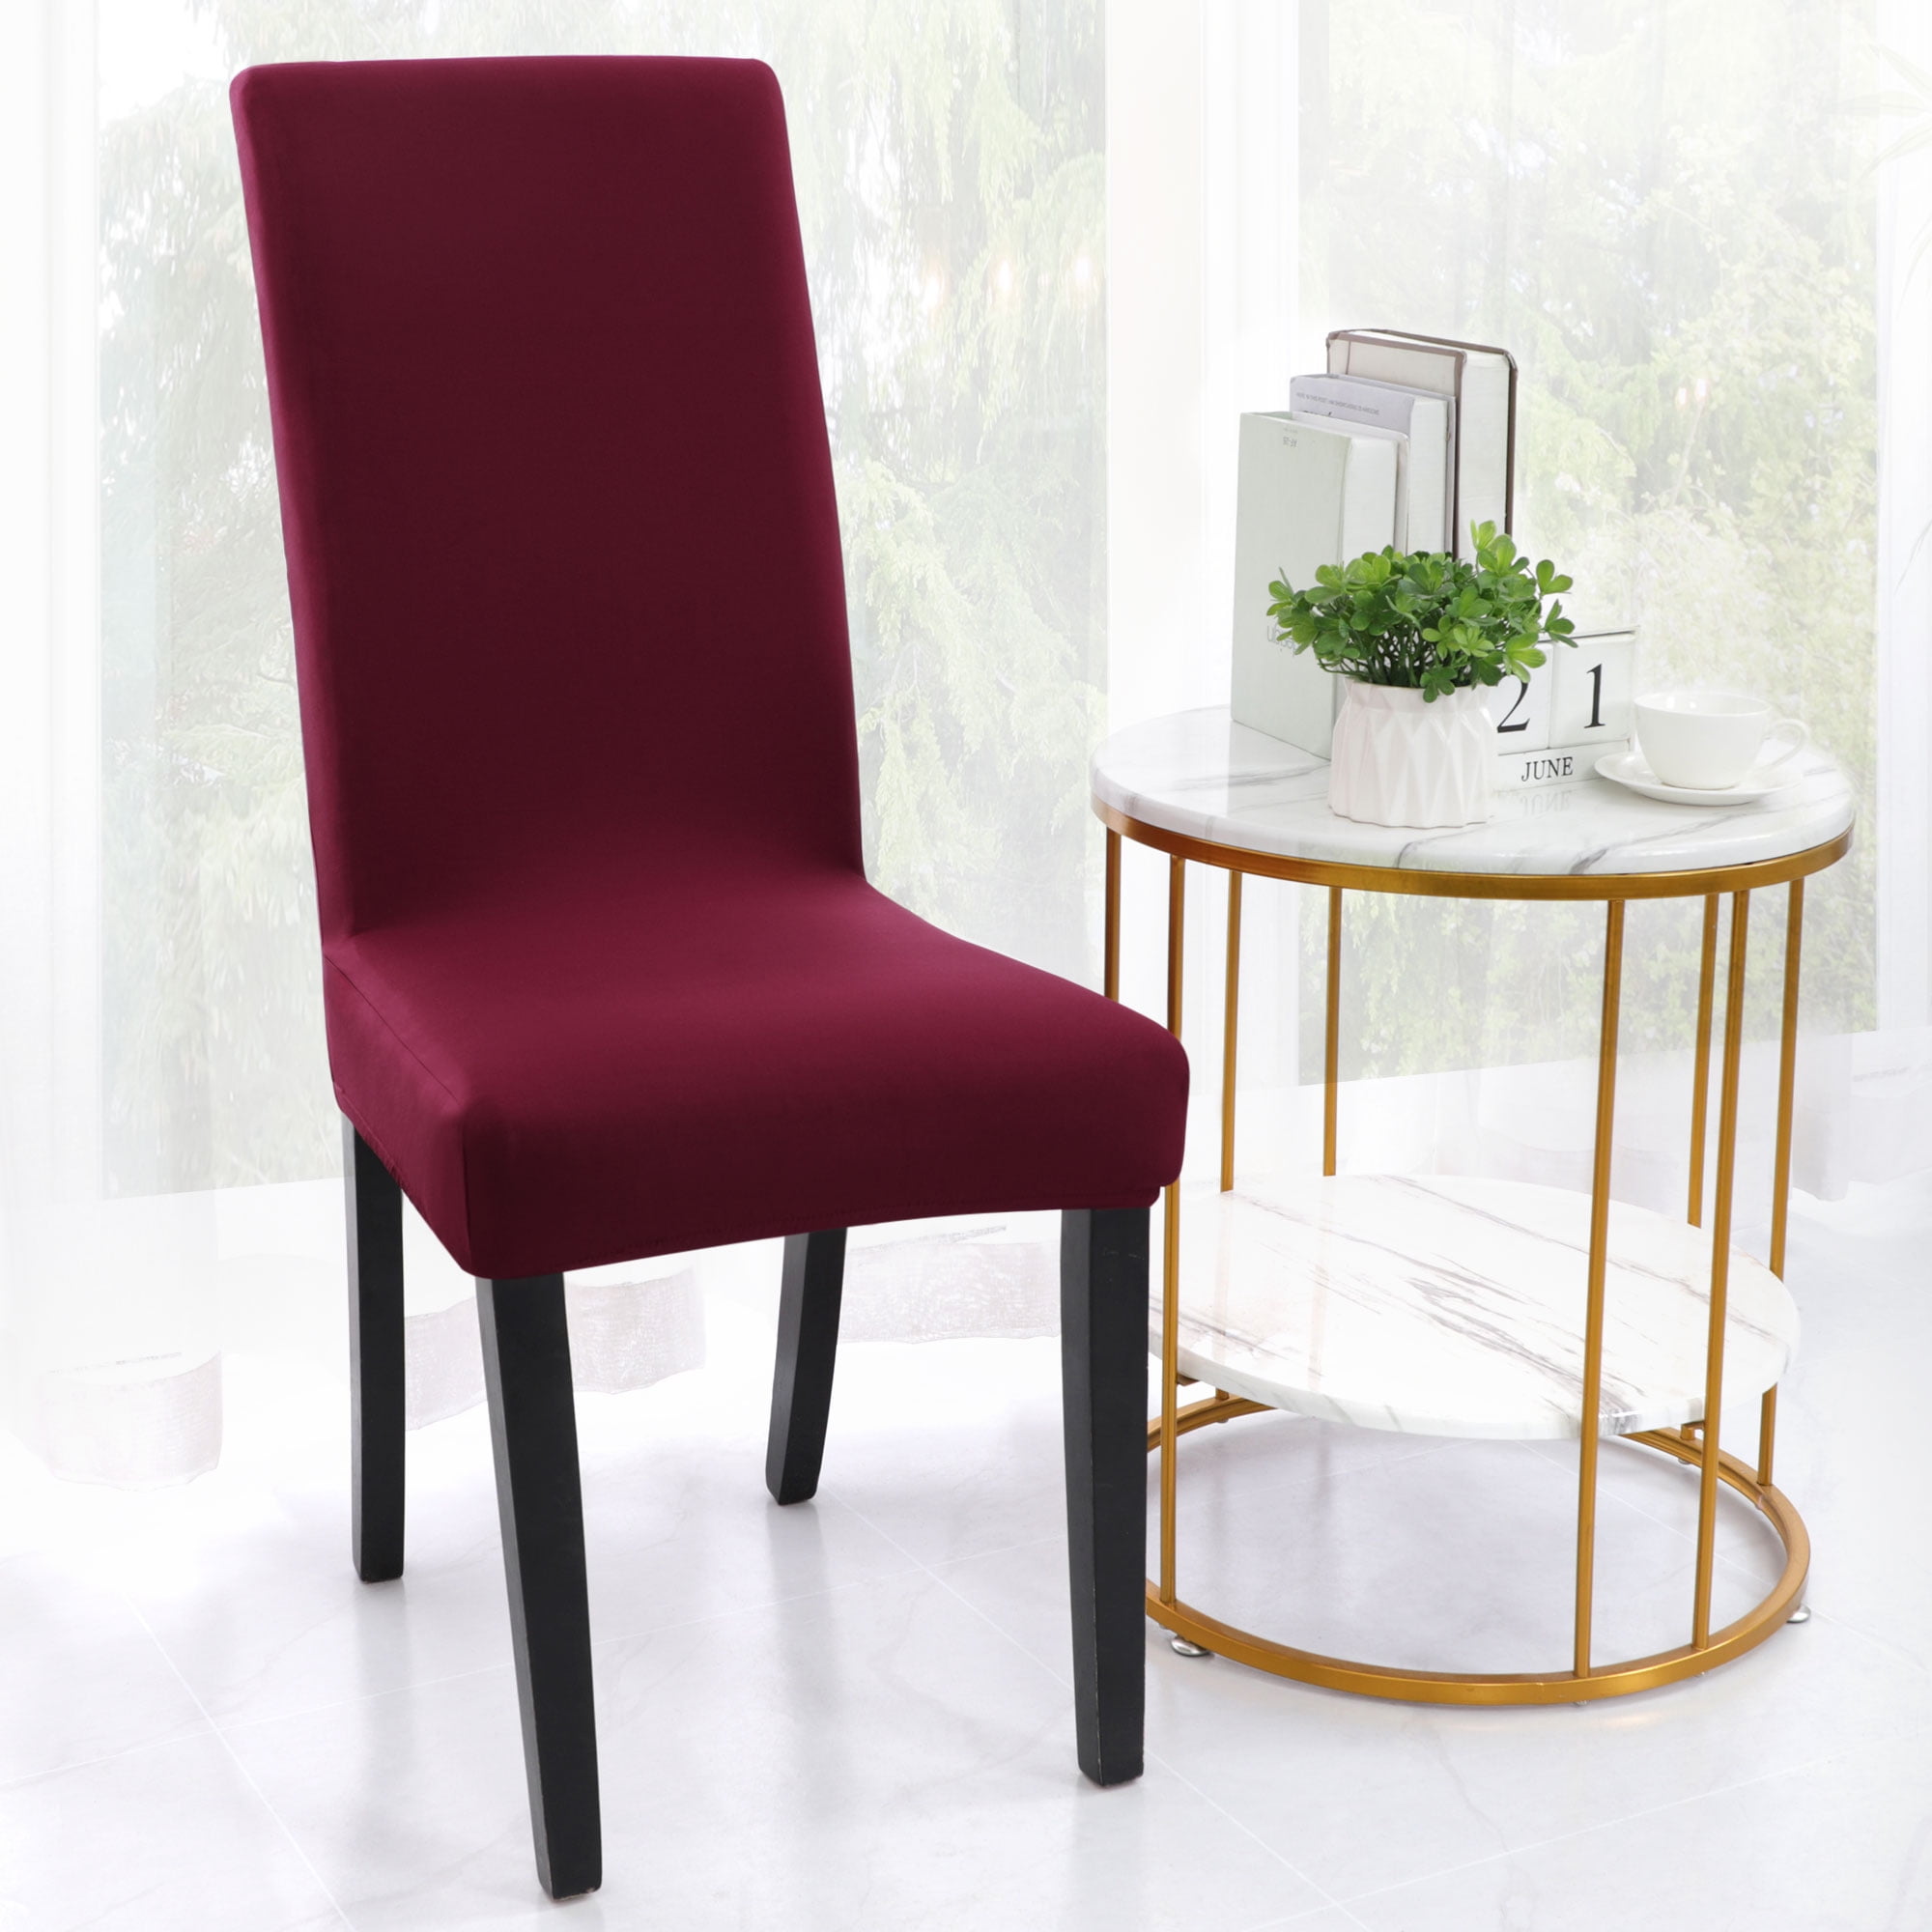 Details about   Wedding Banquet Velvet Removable Stretch Slipcover Dining Chair Cover 